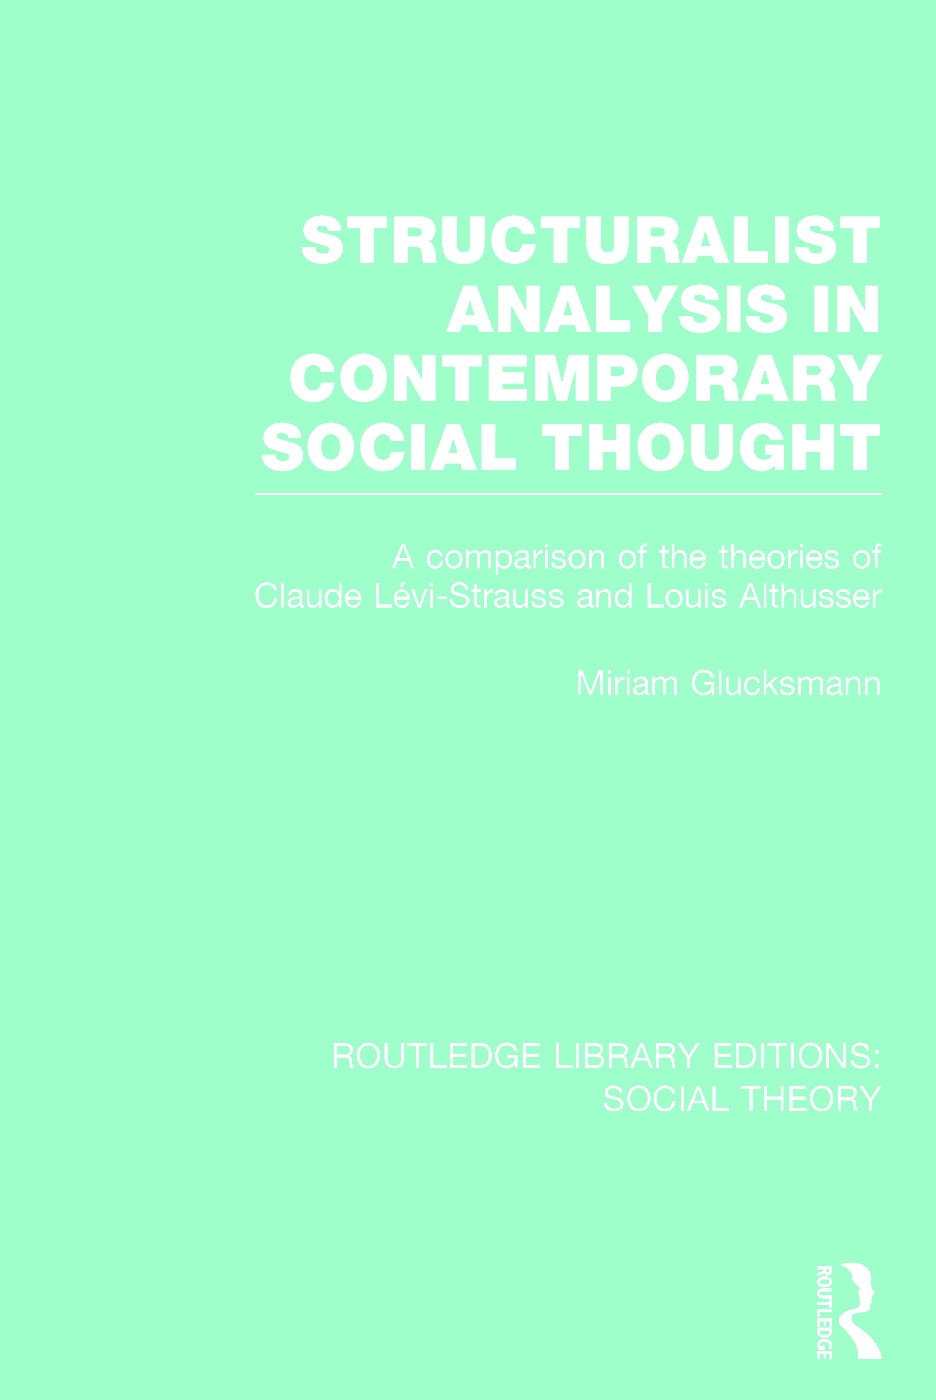 Structuralist Analysis in Contemporary Social Thought: A Comparison of the Theories of Claude Lévi-strauss and Louis Althusser